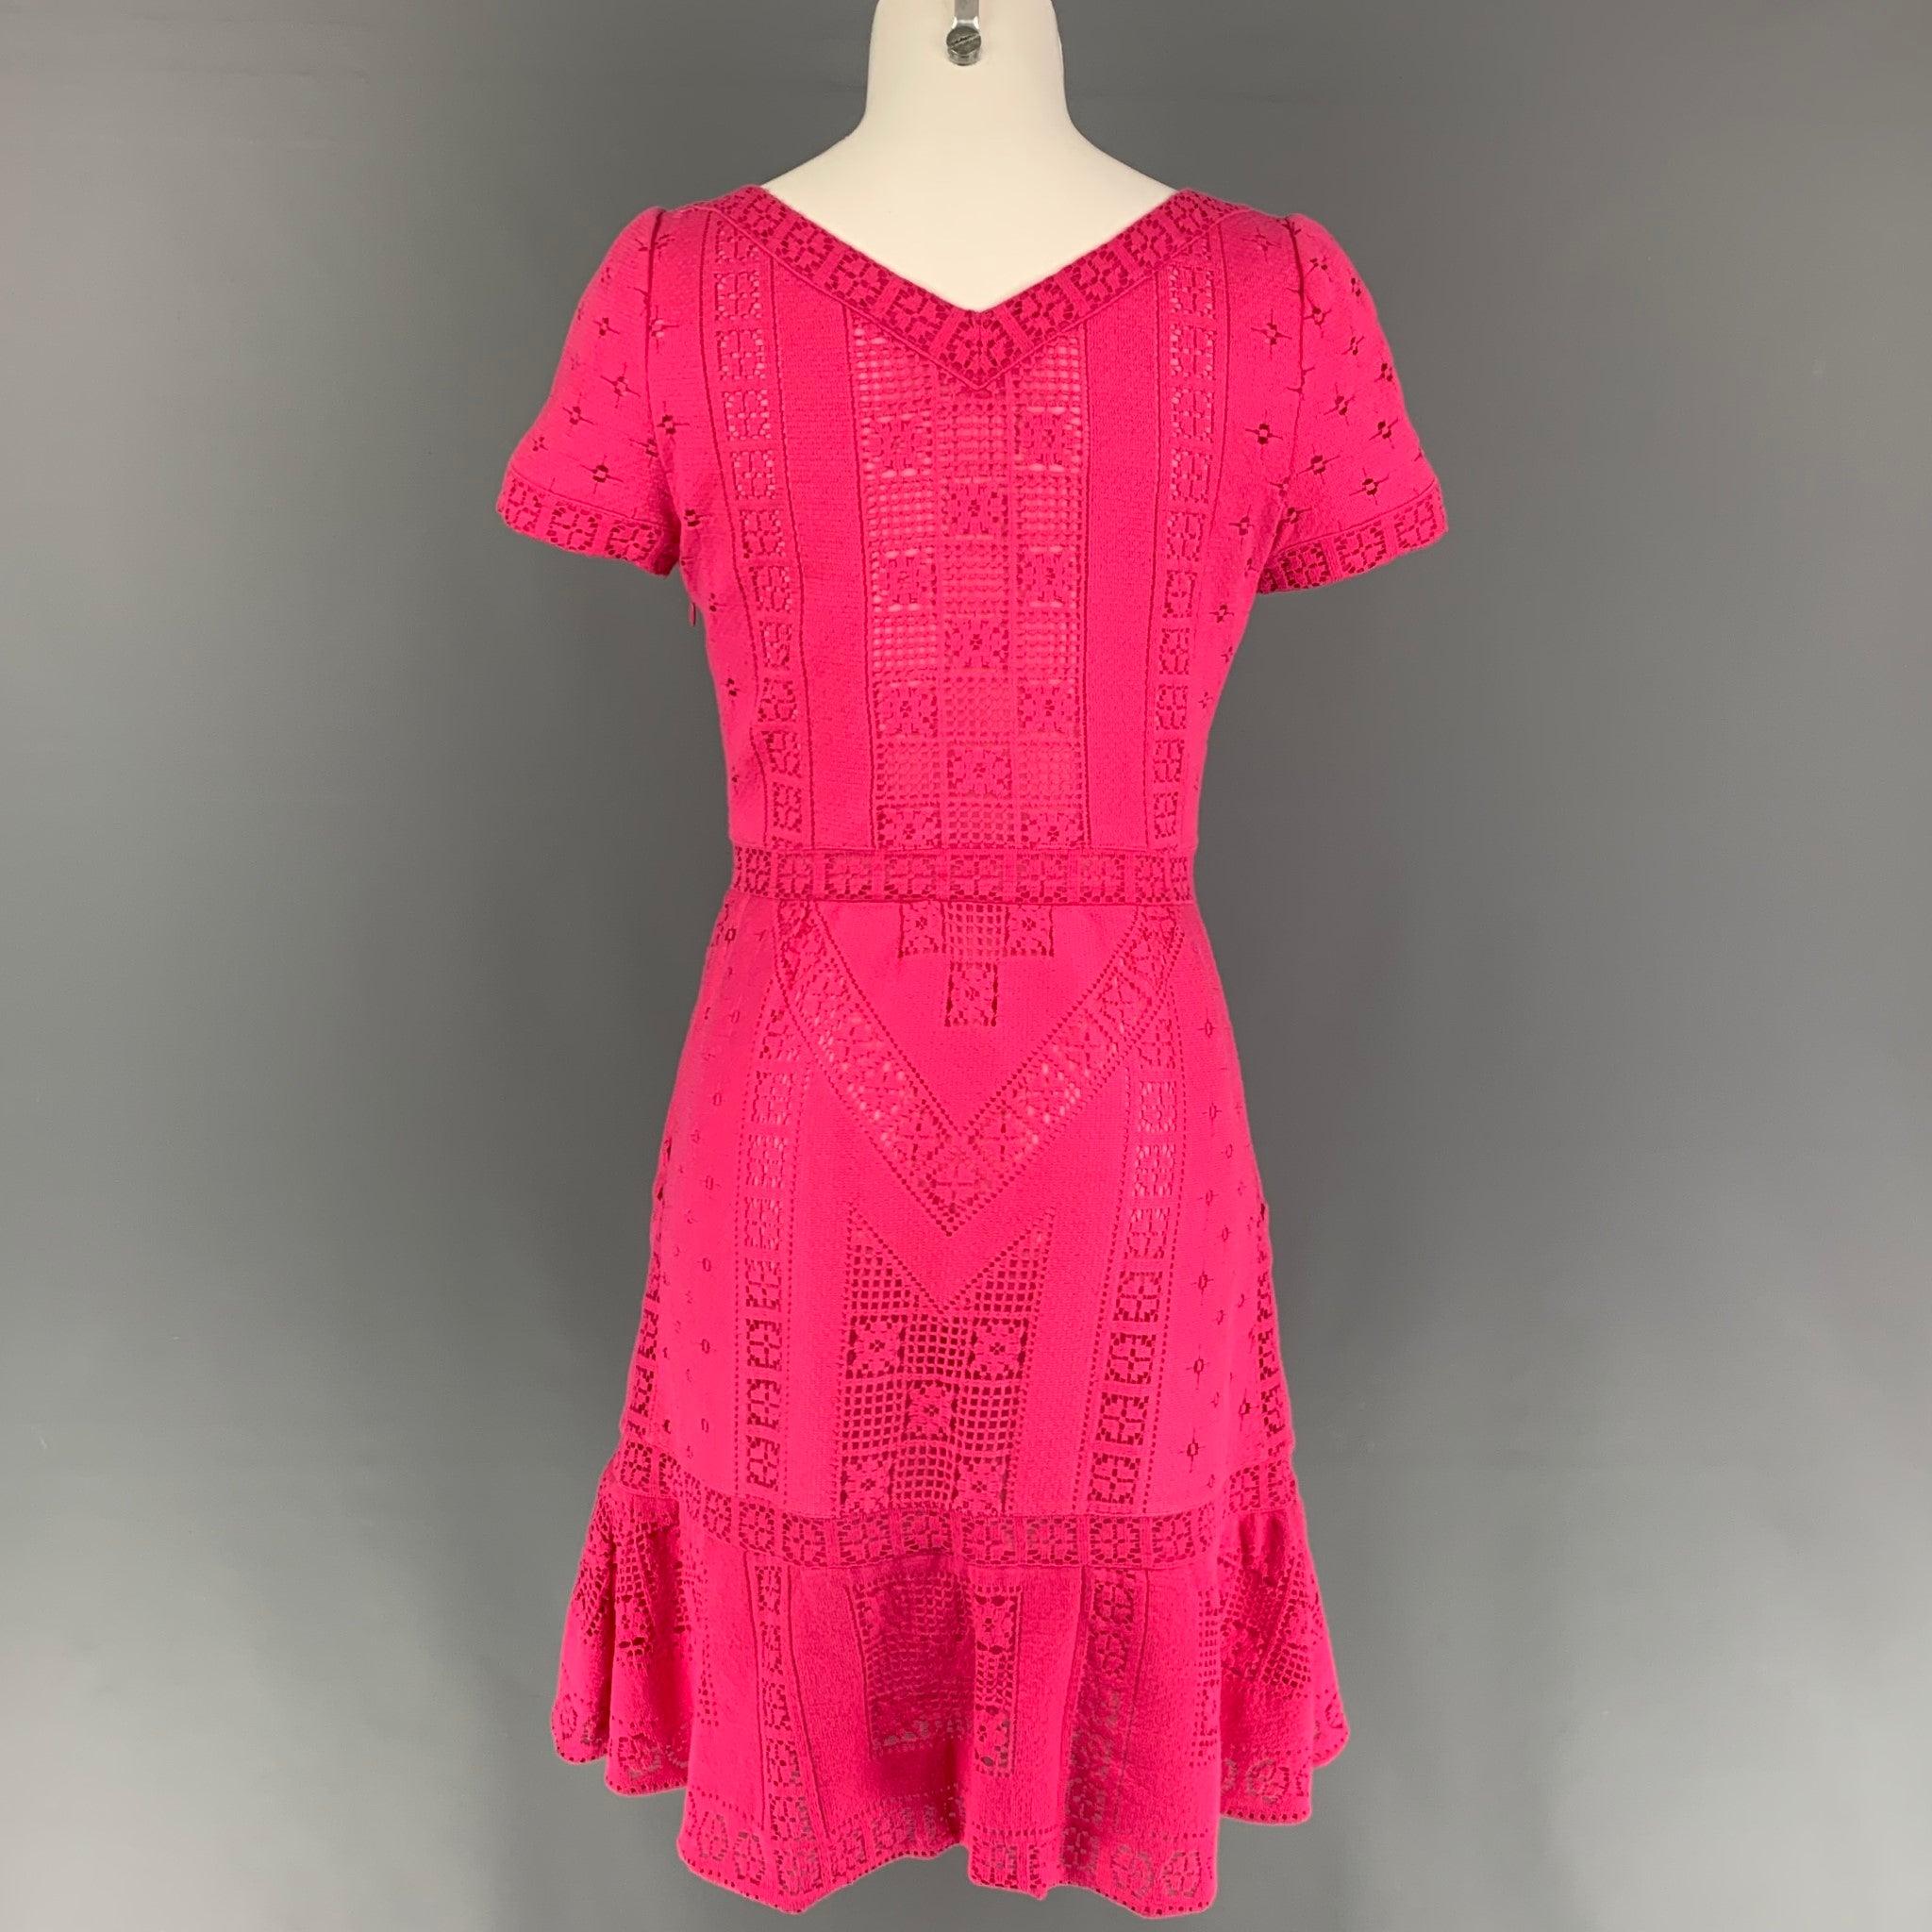 VALENTINO Pink Lace Size 8 Cotton Nylon Short Sleeve Dress In Good Condition For Sale In San Francisco, CA